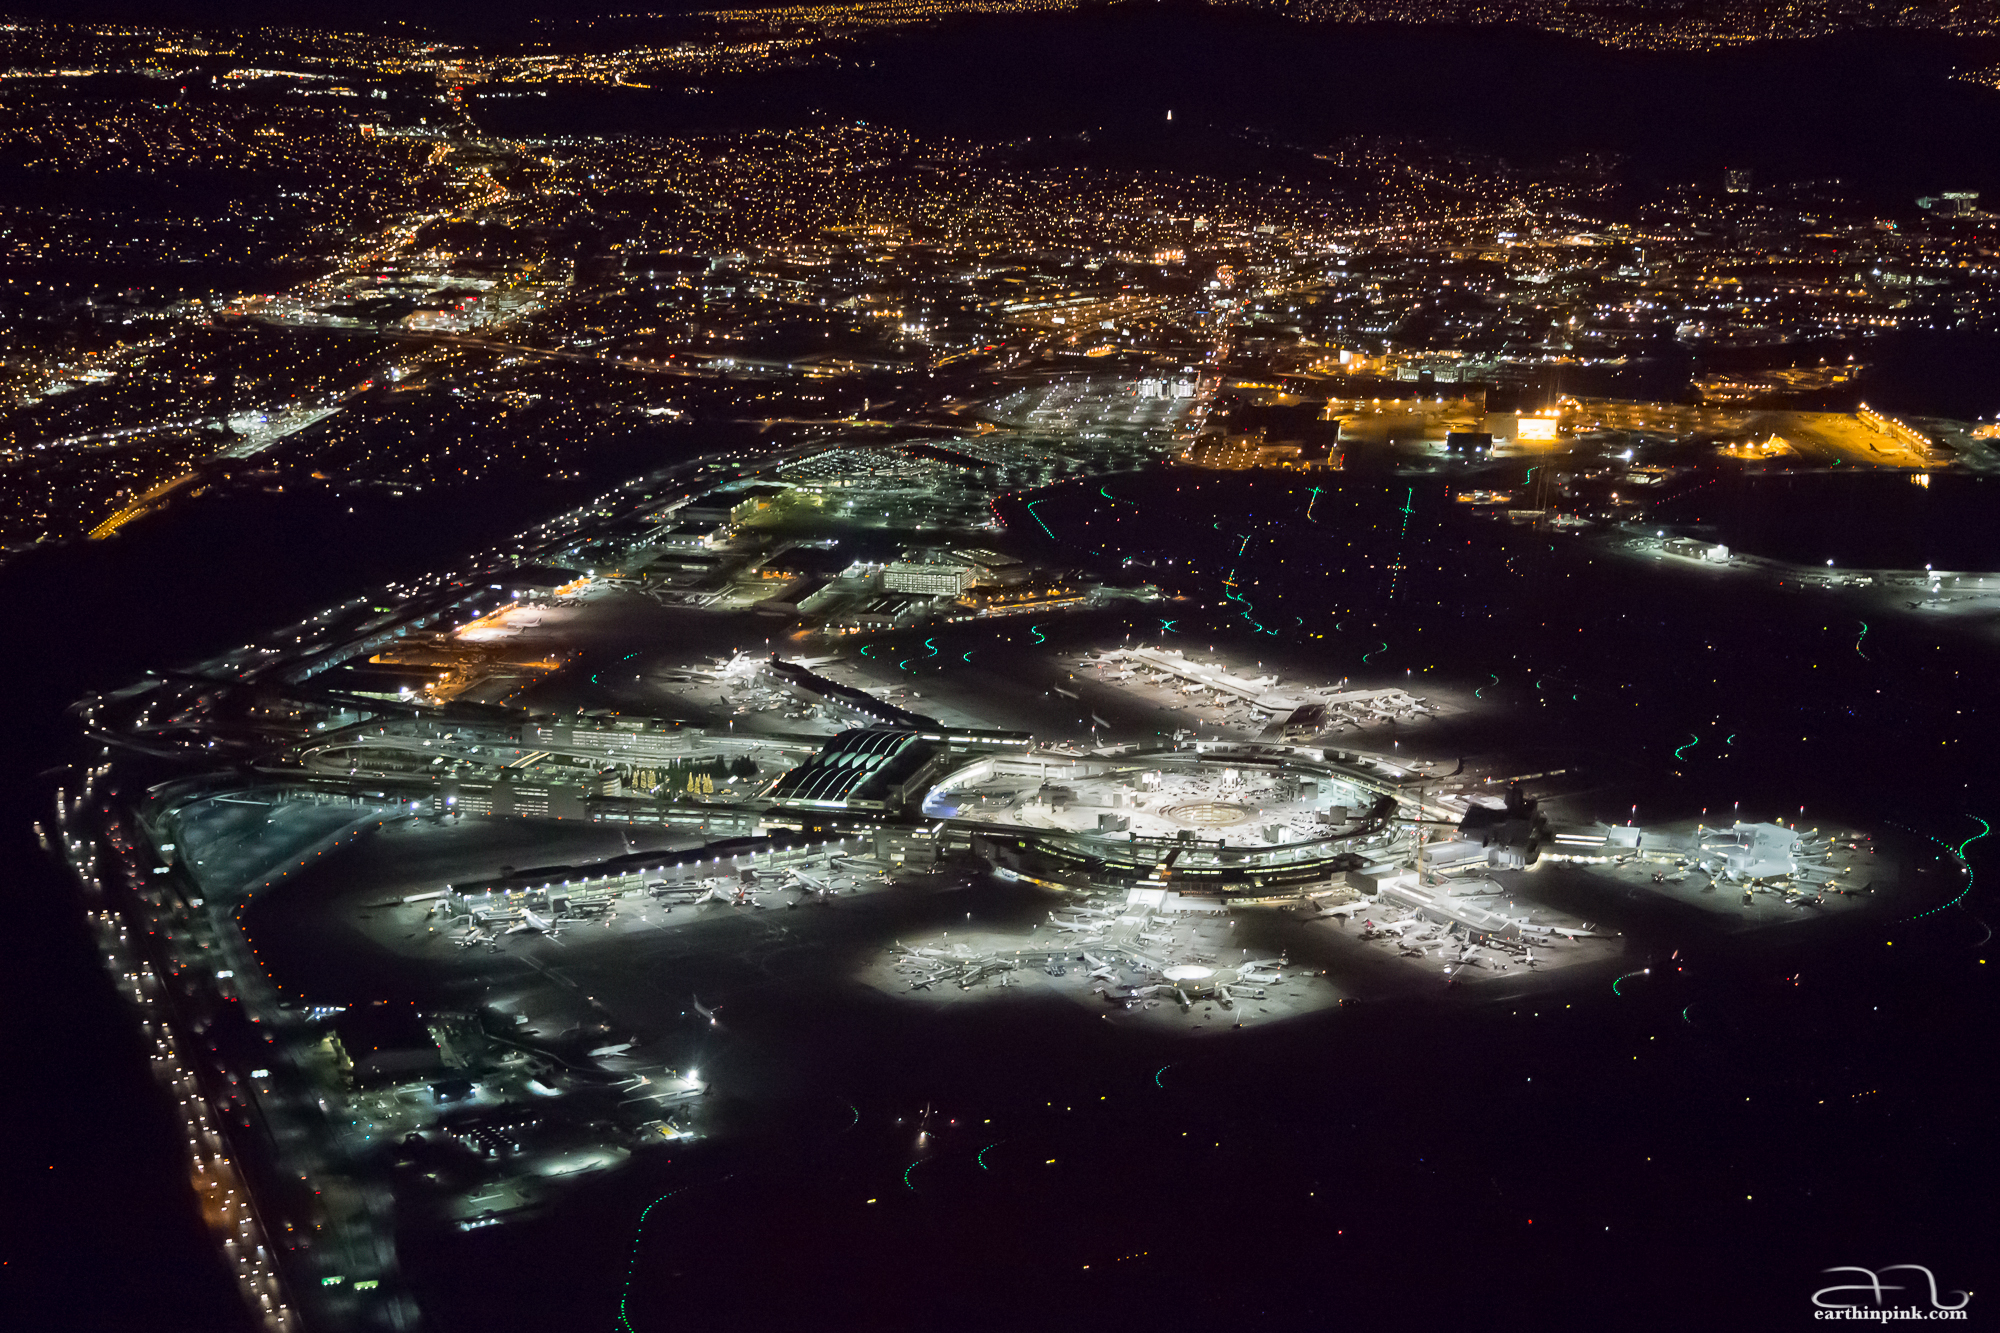 Night flying over San Francisco International airport. I never thought I'd post a photo taken at ISO 25600 to this website, but here we are...